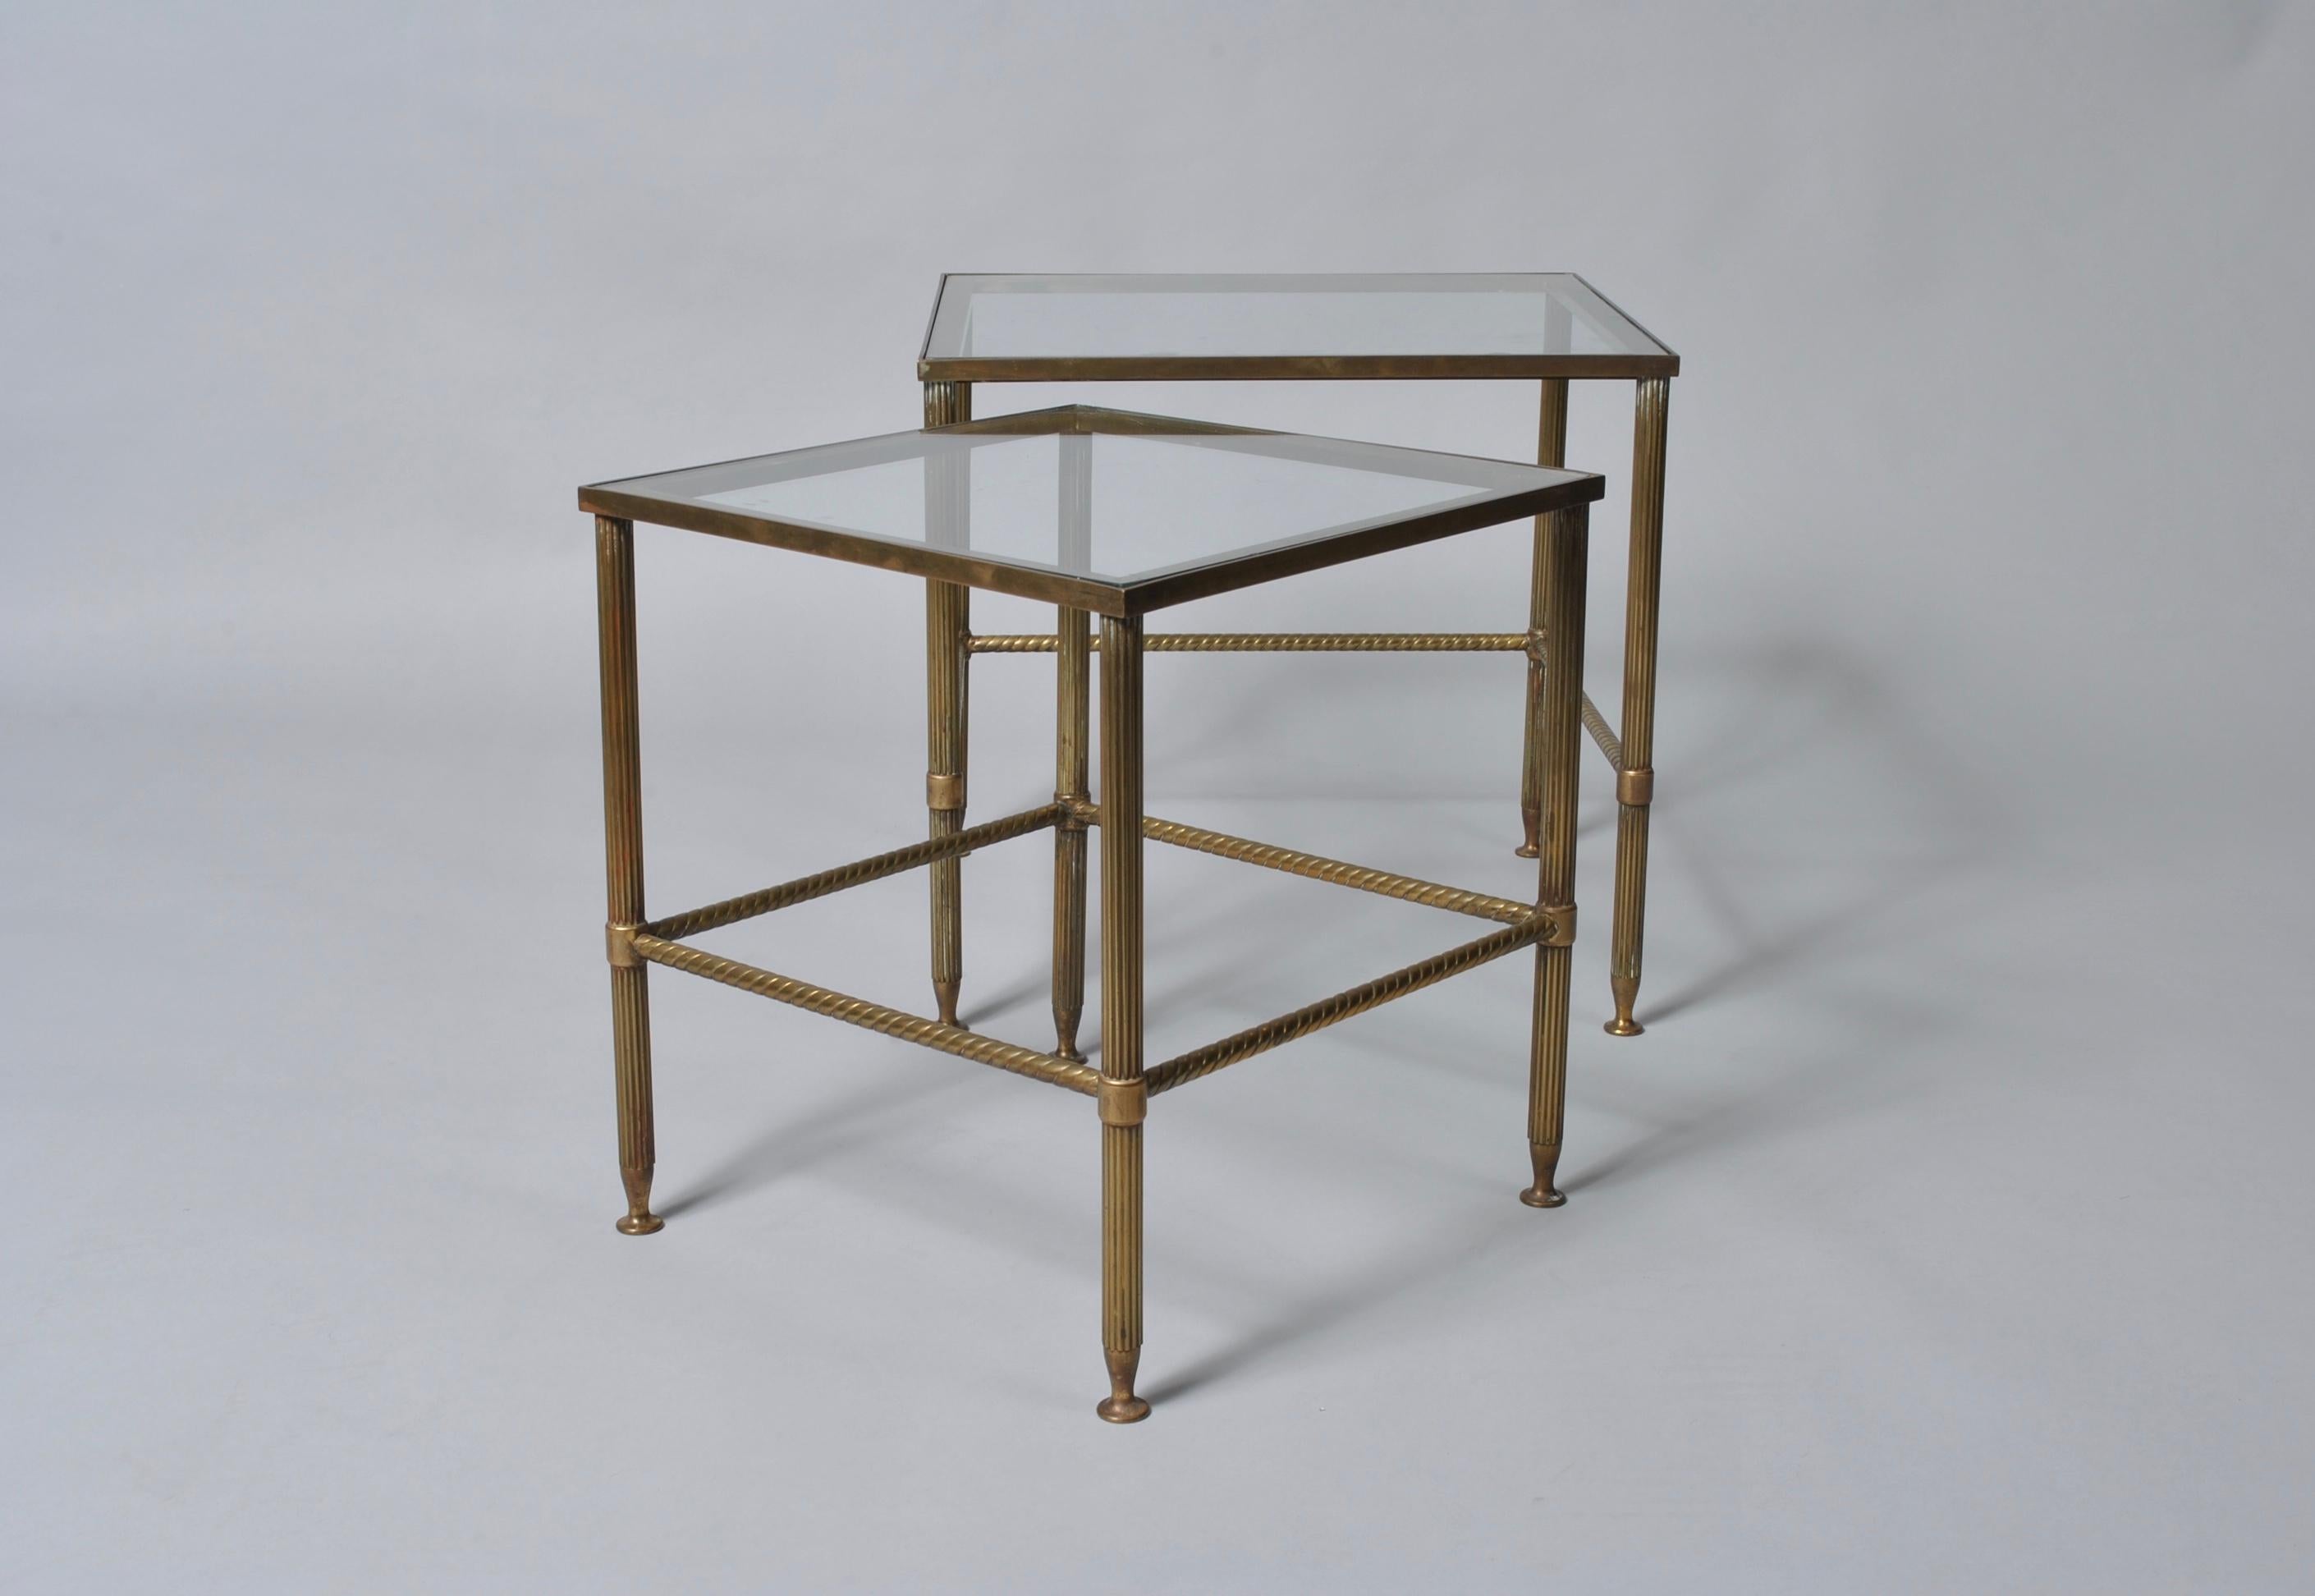 A set of very fine quality midcentury French Maison nesting tables. Produced in France, circa 1950. Superb aged patination to the brass roped and fluted frames. Classic, stylish and practical pieces.
      